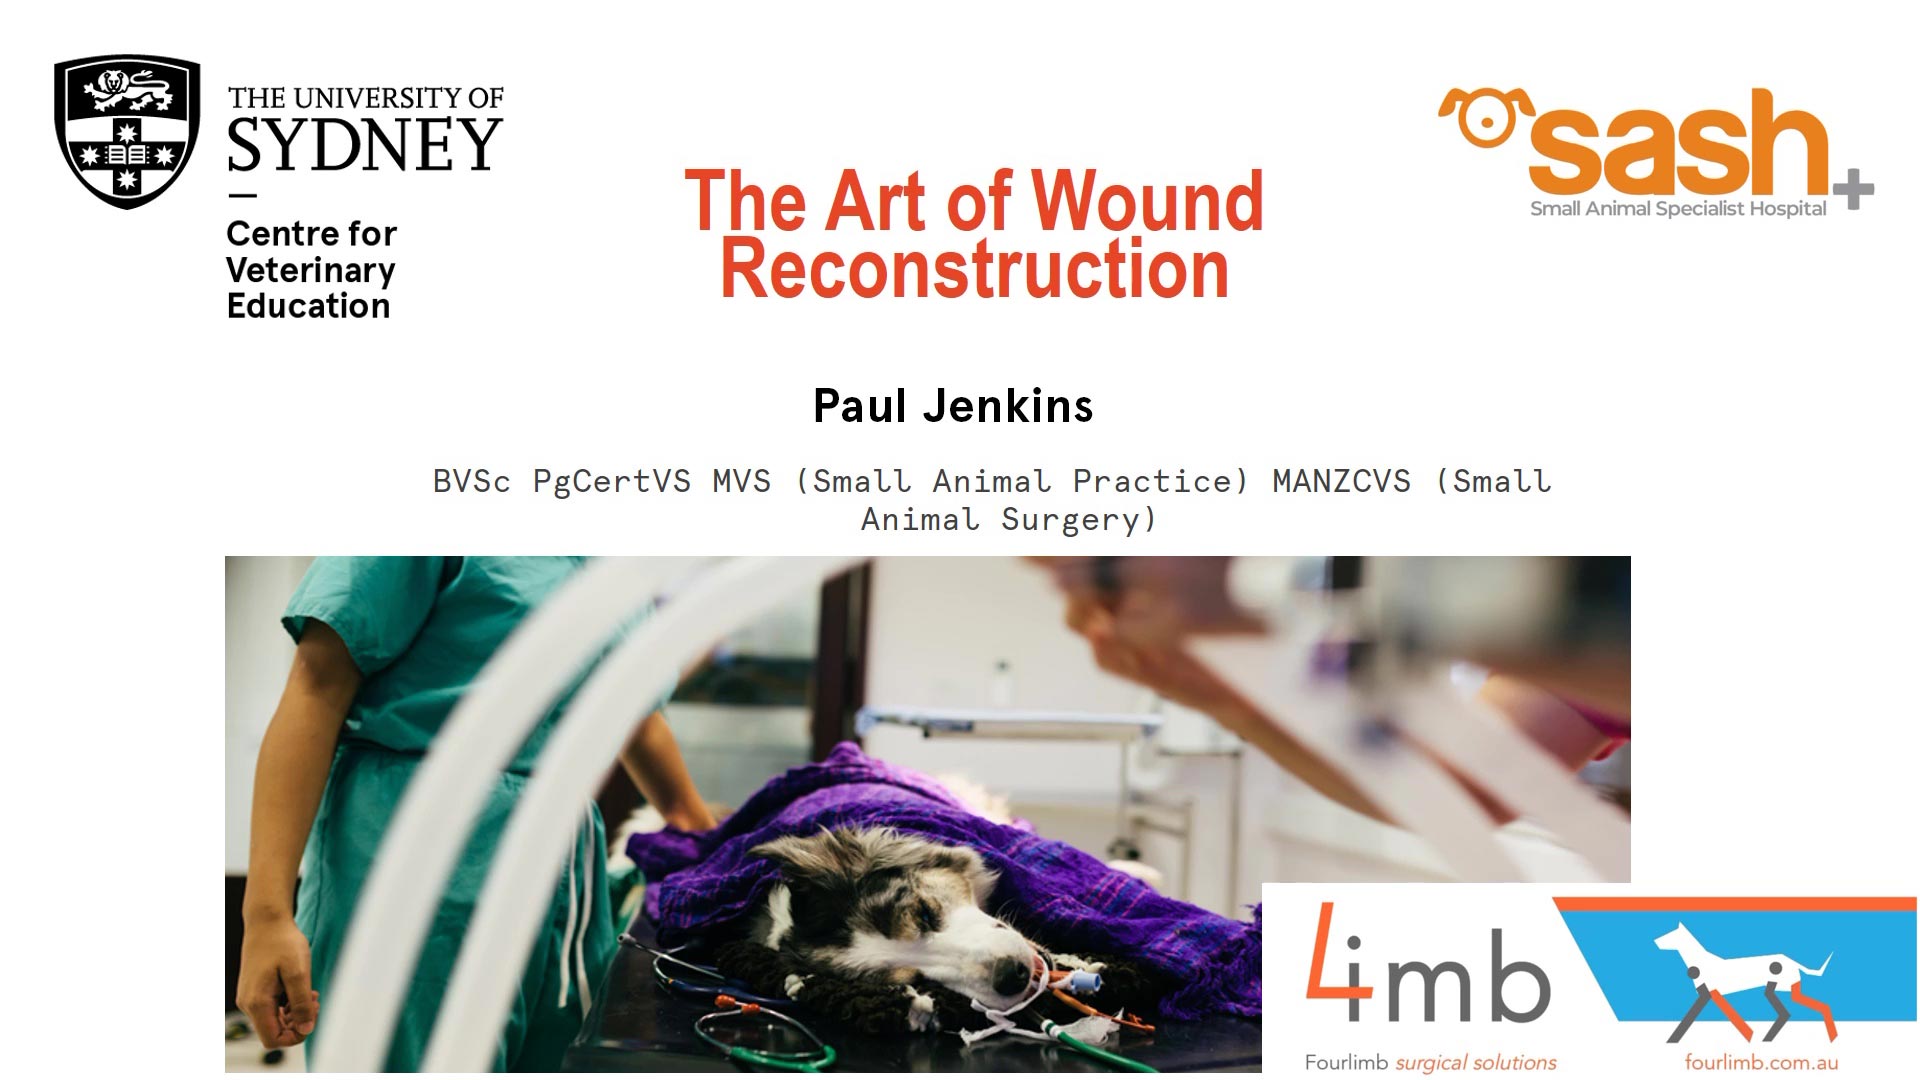 The Art of Wound Reconstruction